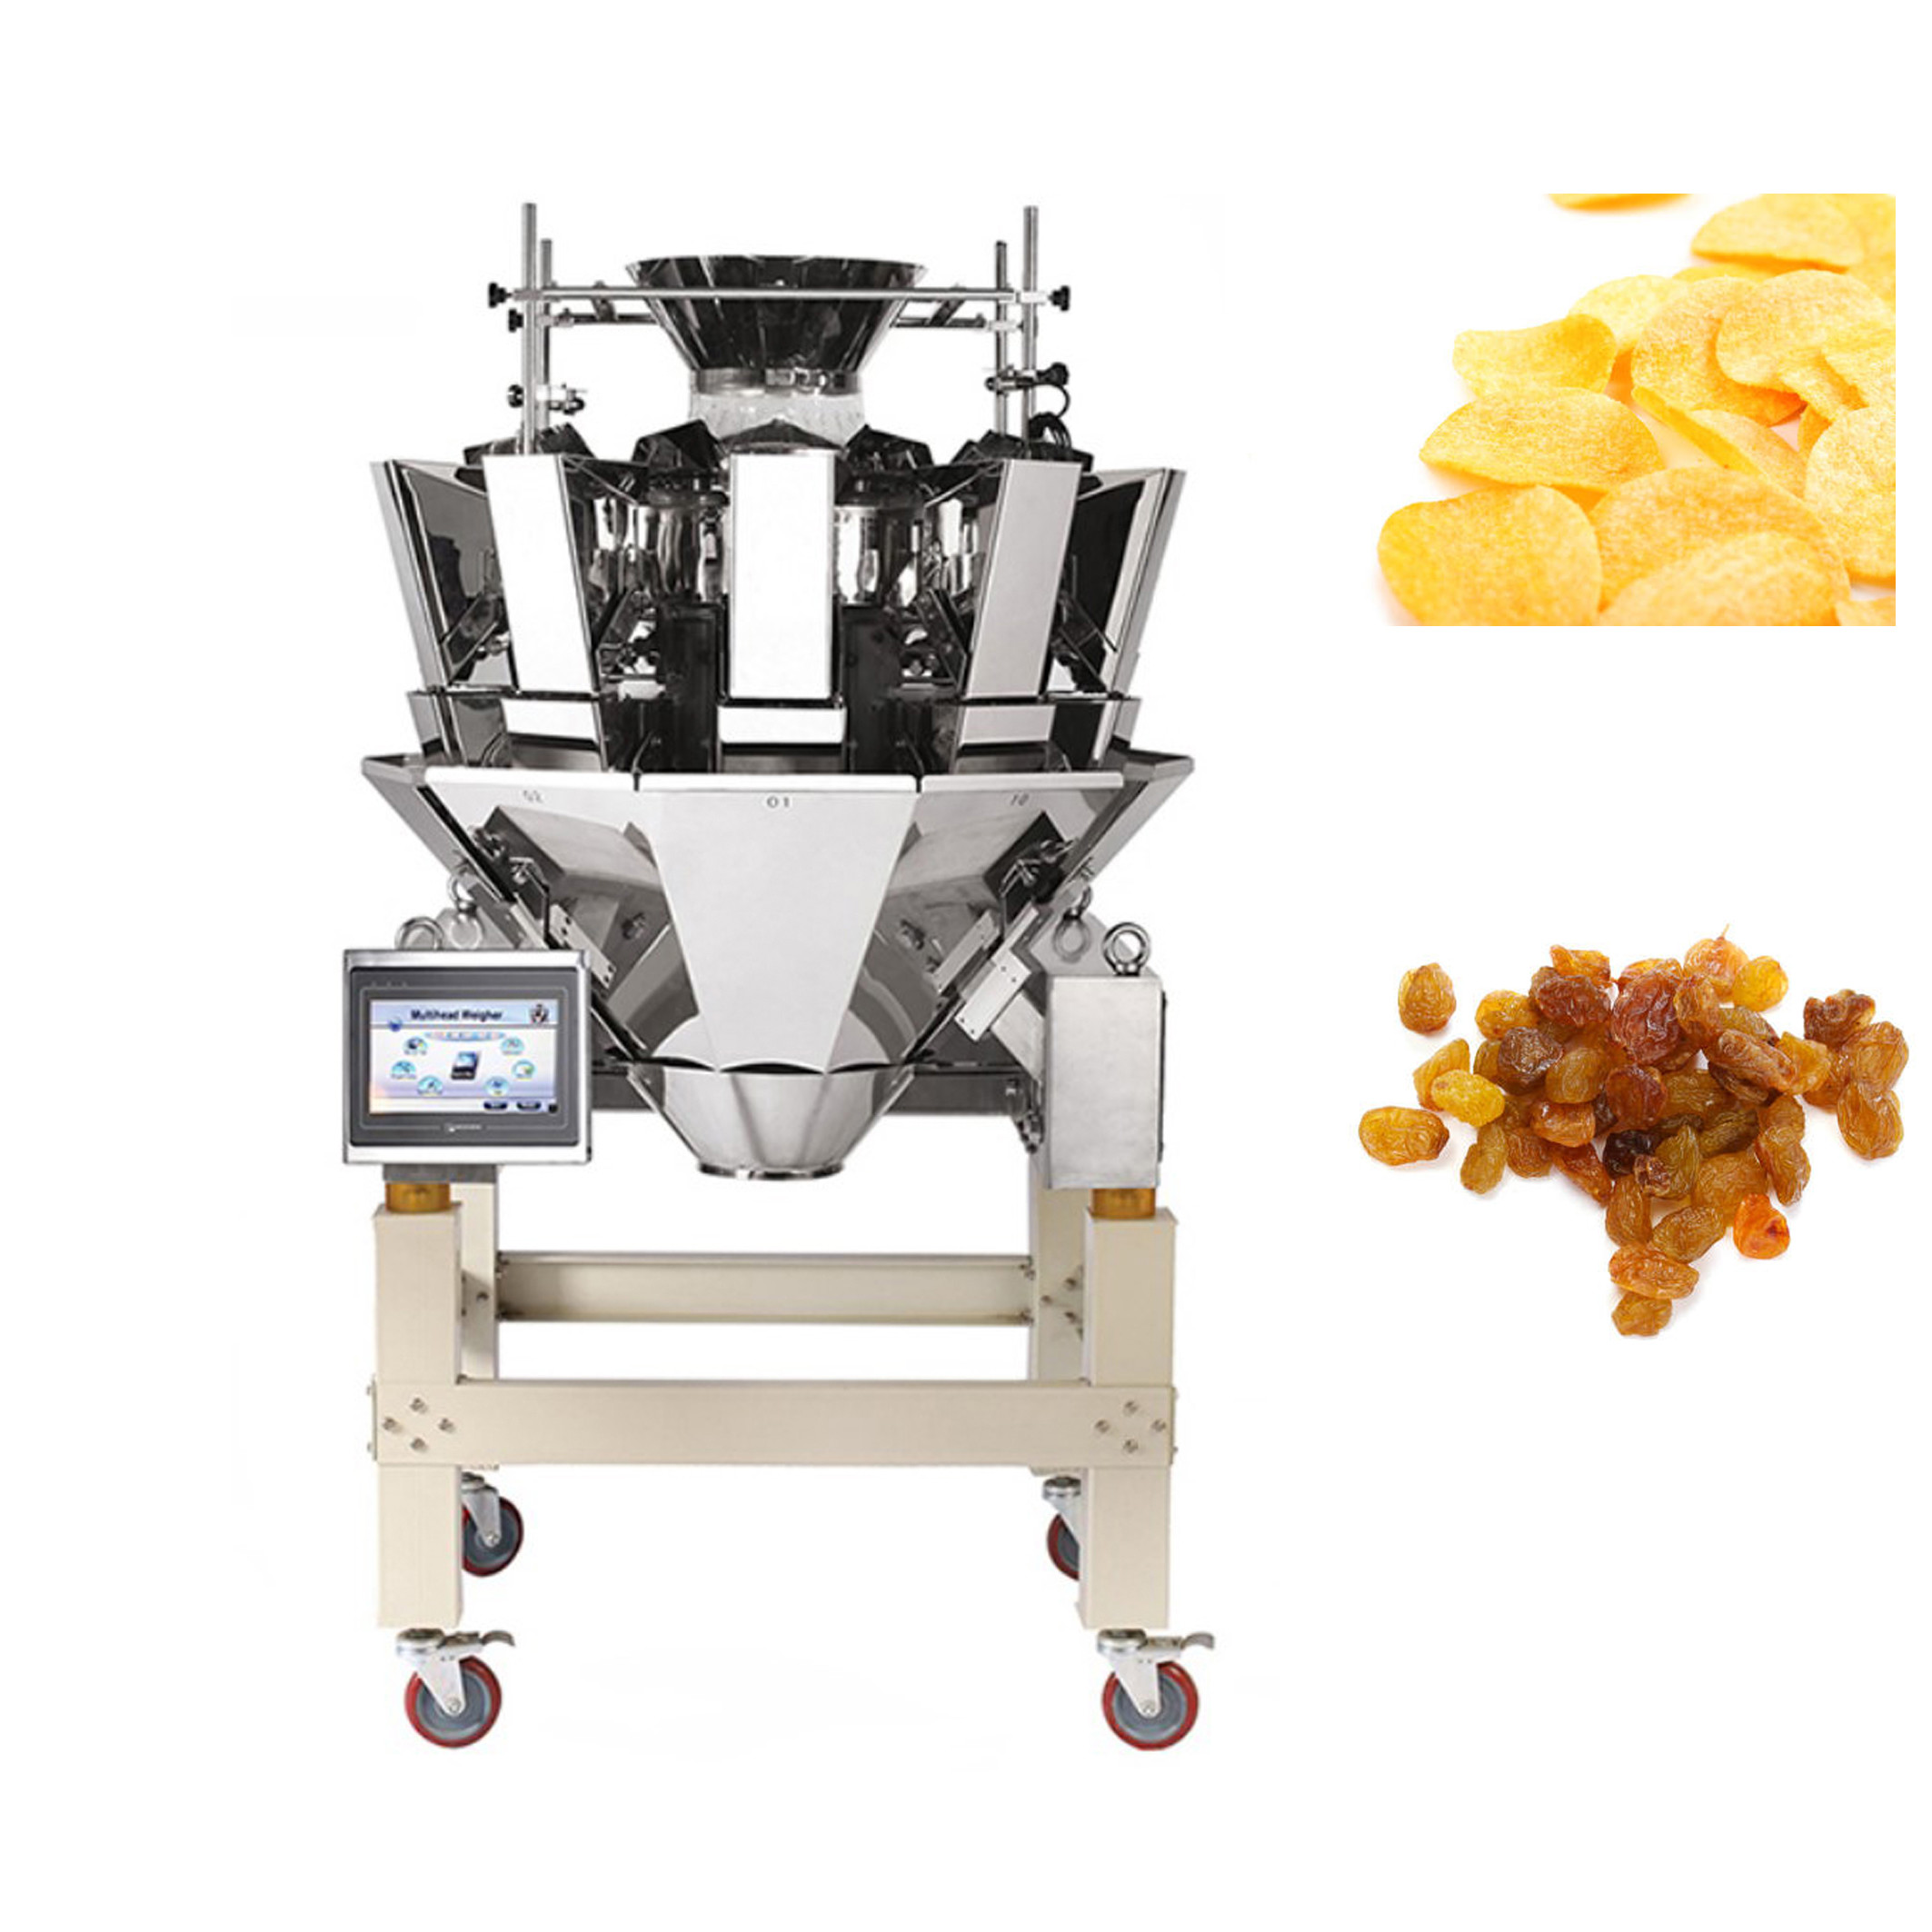 10 Heads 14 Heads Multi Head Packing Machine For Potato Chips Puffed Food